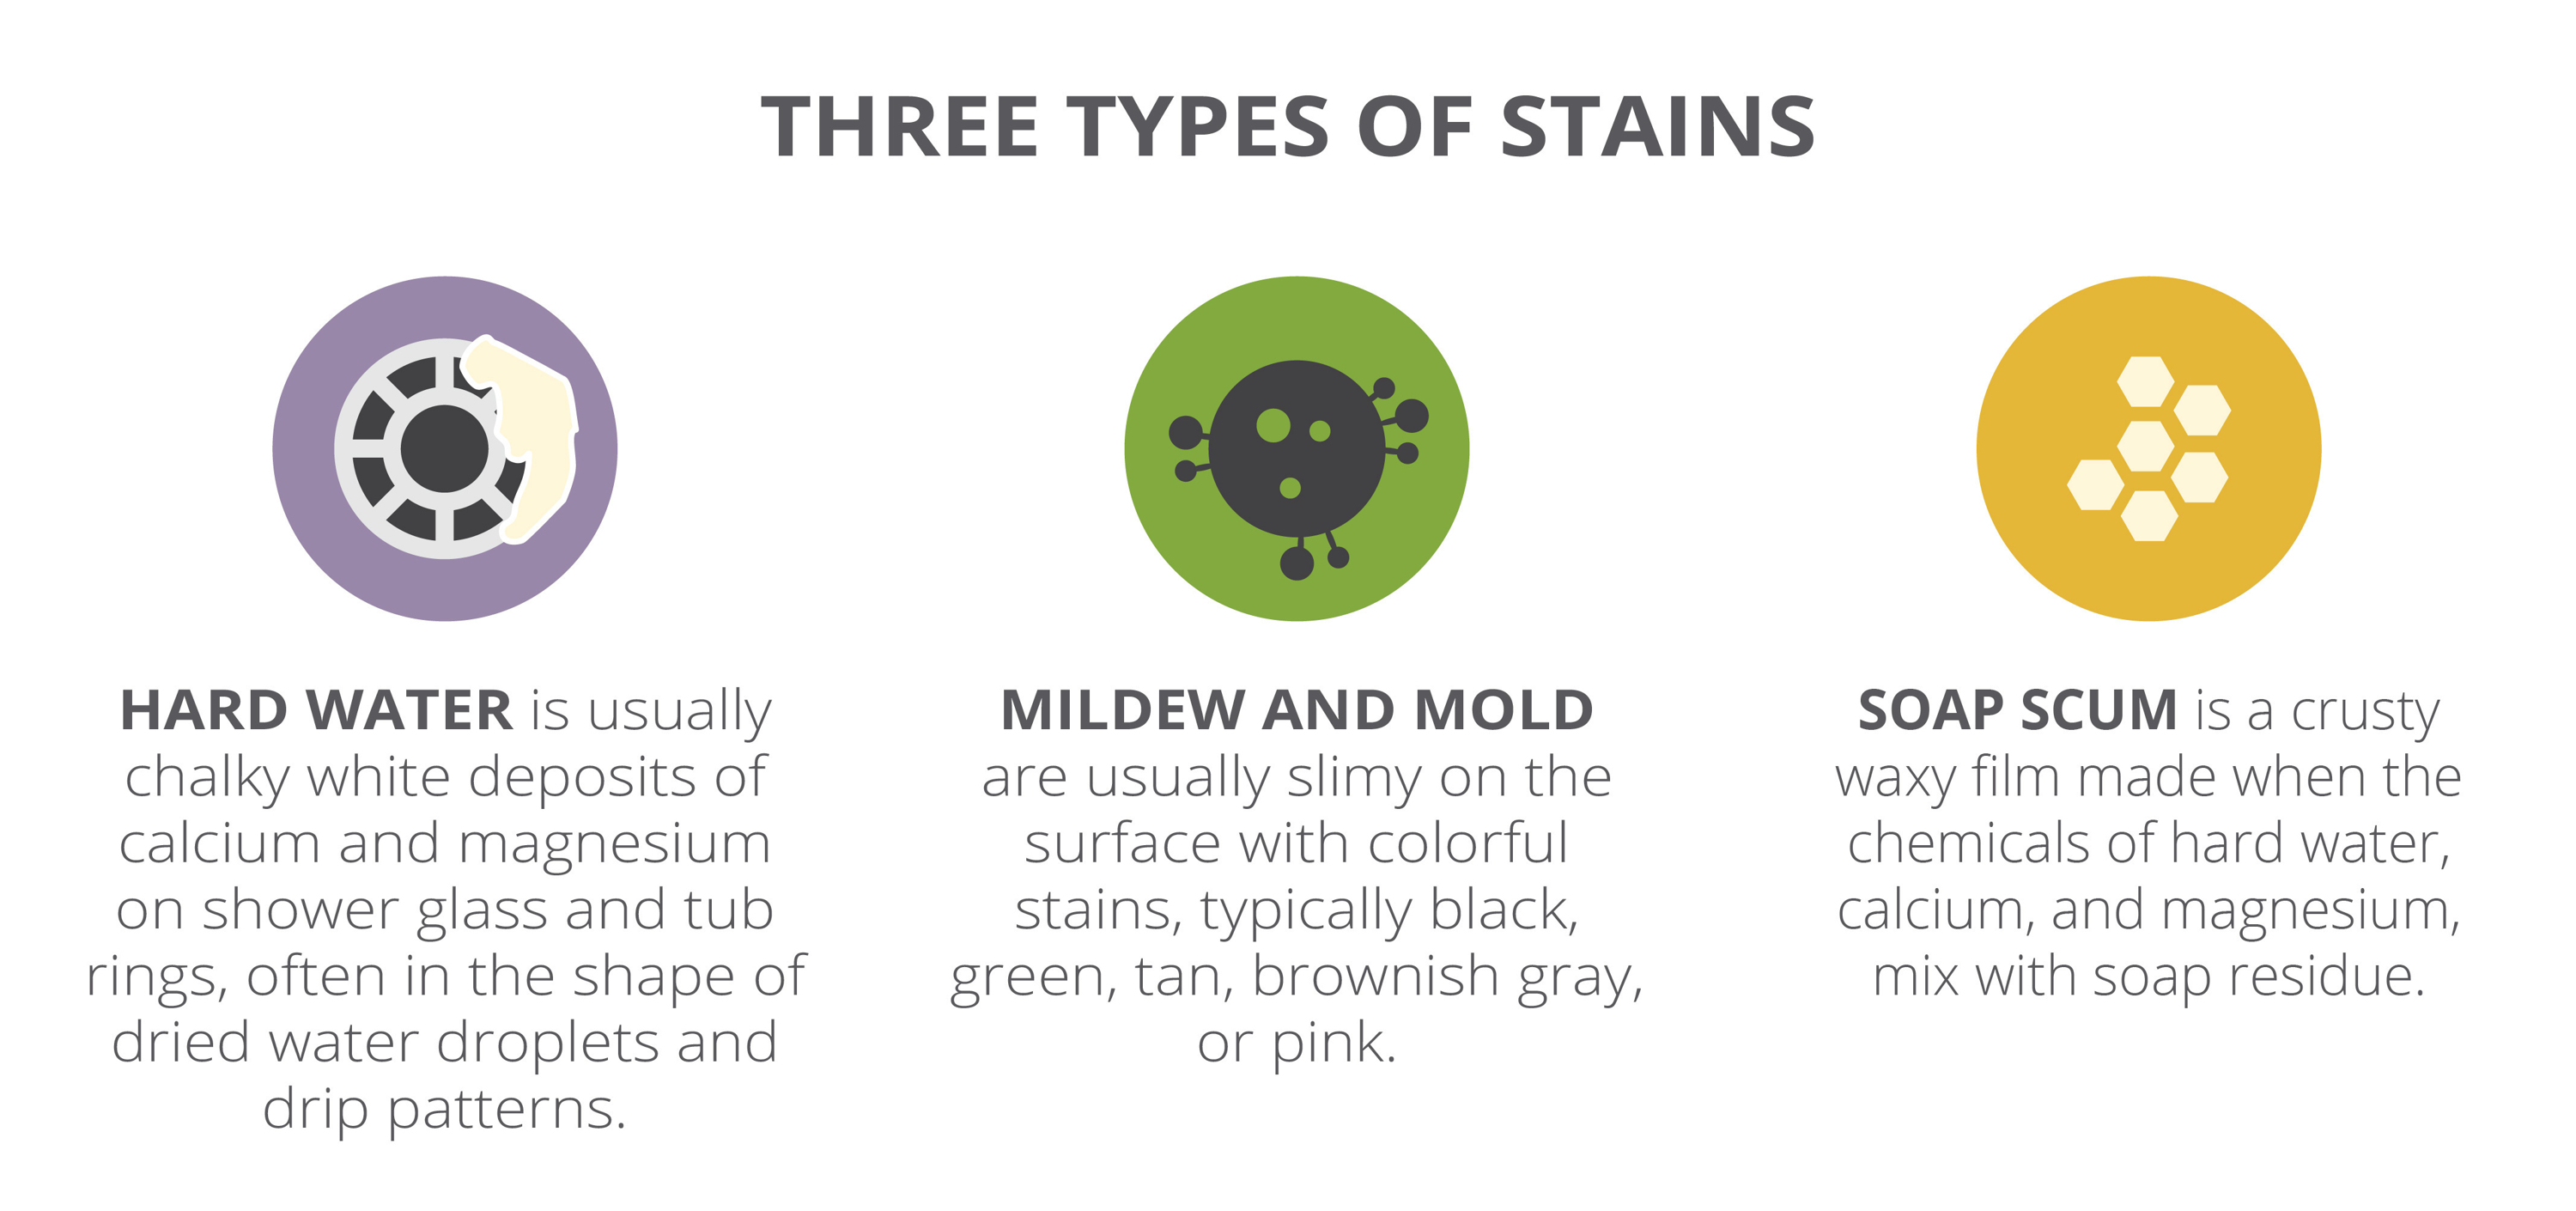 The three types of stains infographic